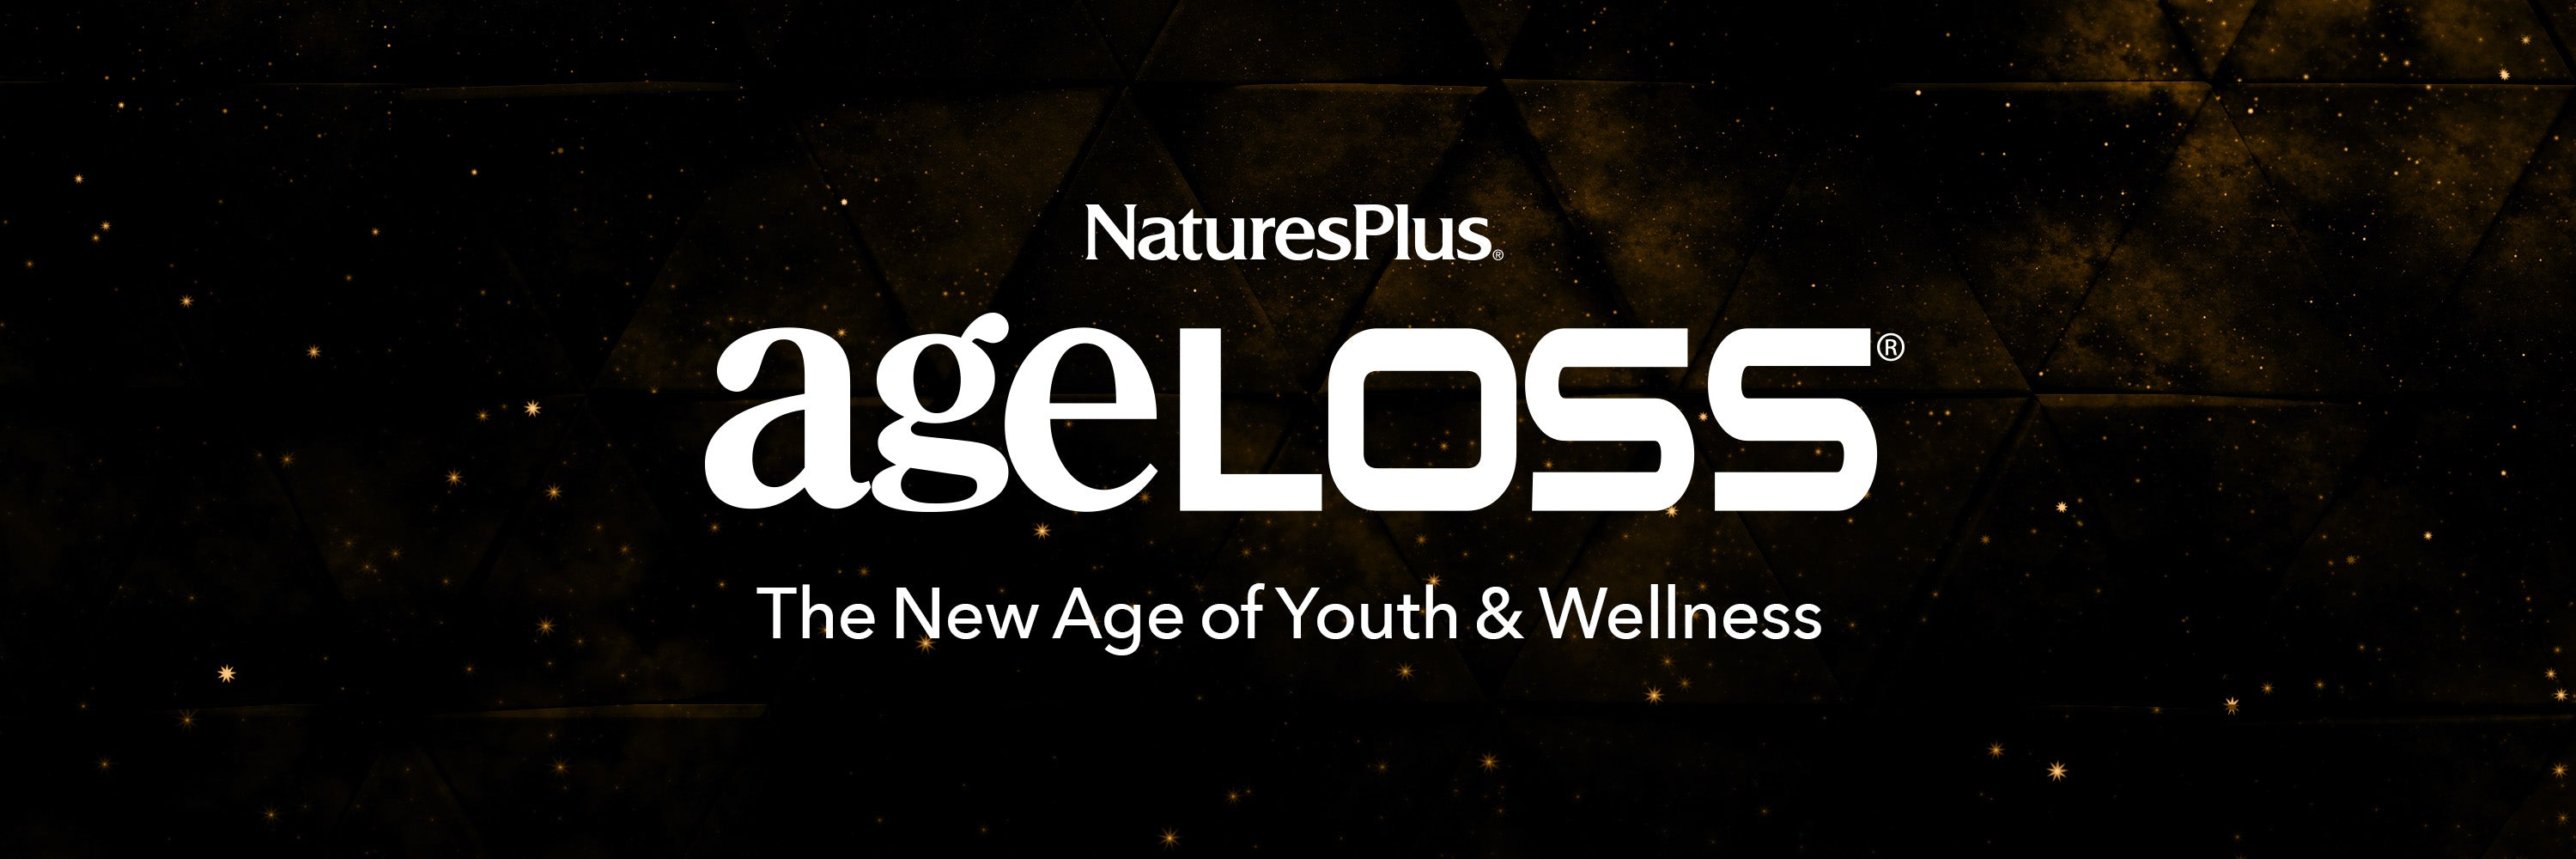 AgeLoss collection image banner